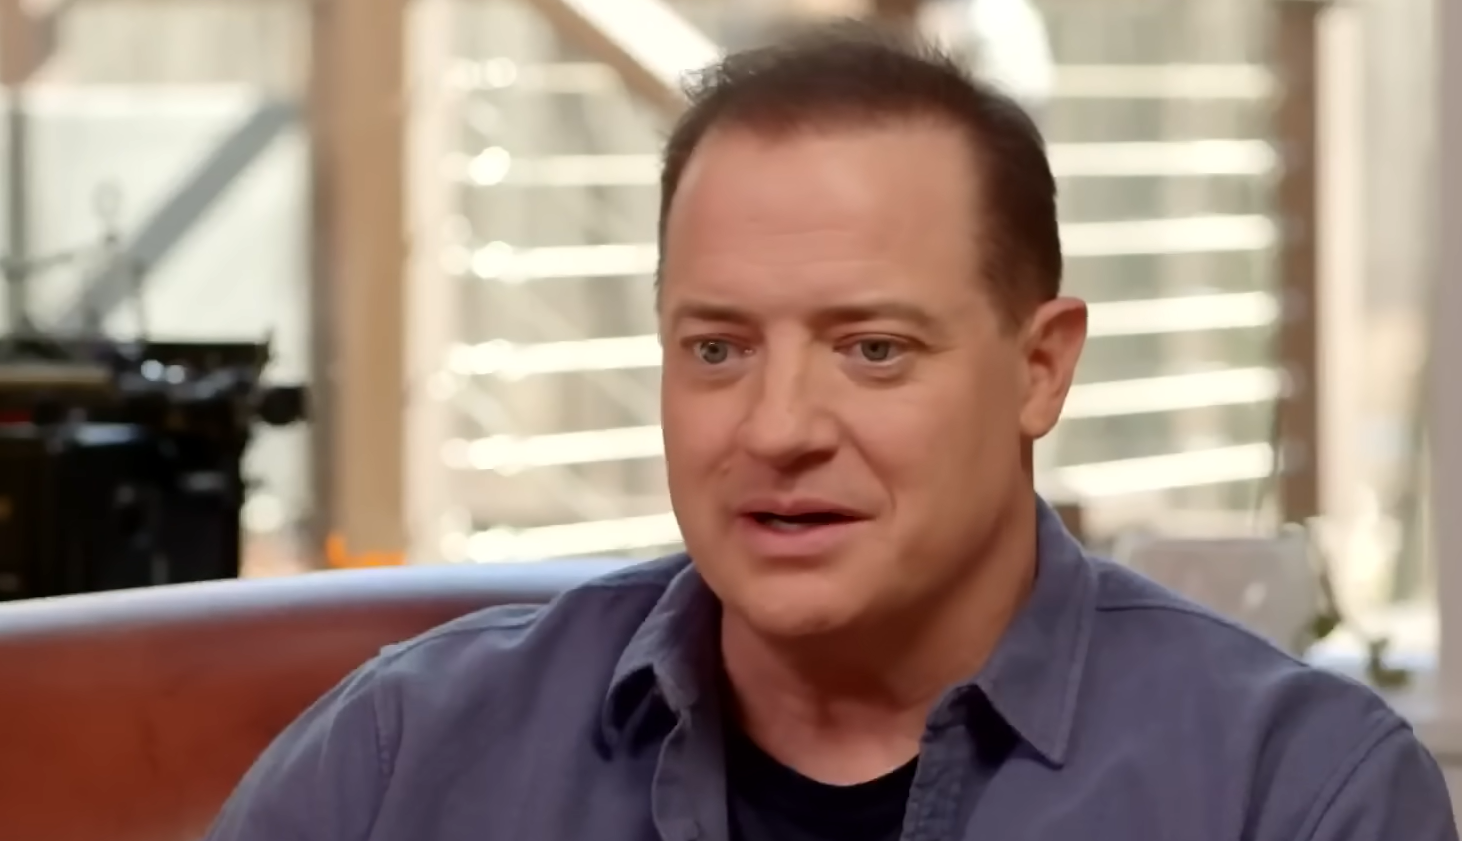 Brendan Fraser in a blue shirt, sitting on sofa in front of the camera in the room